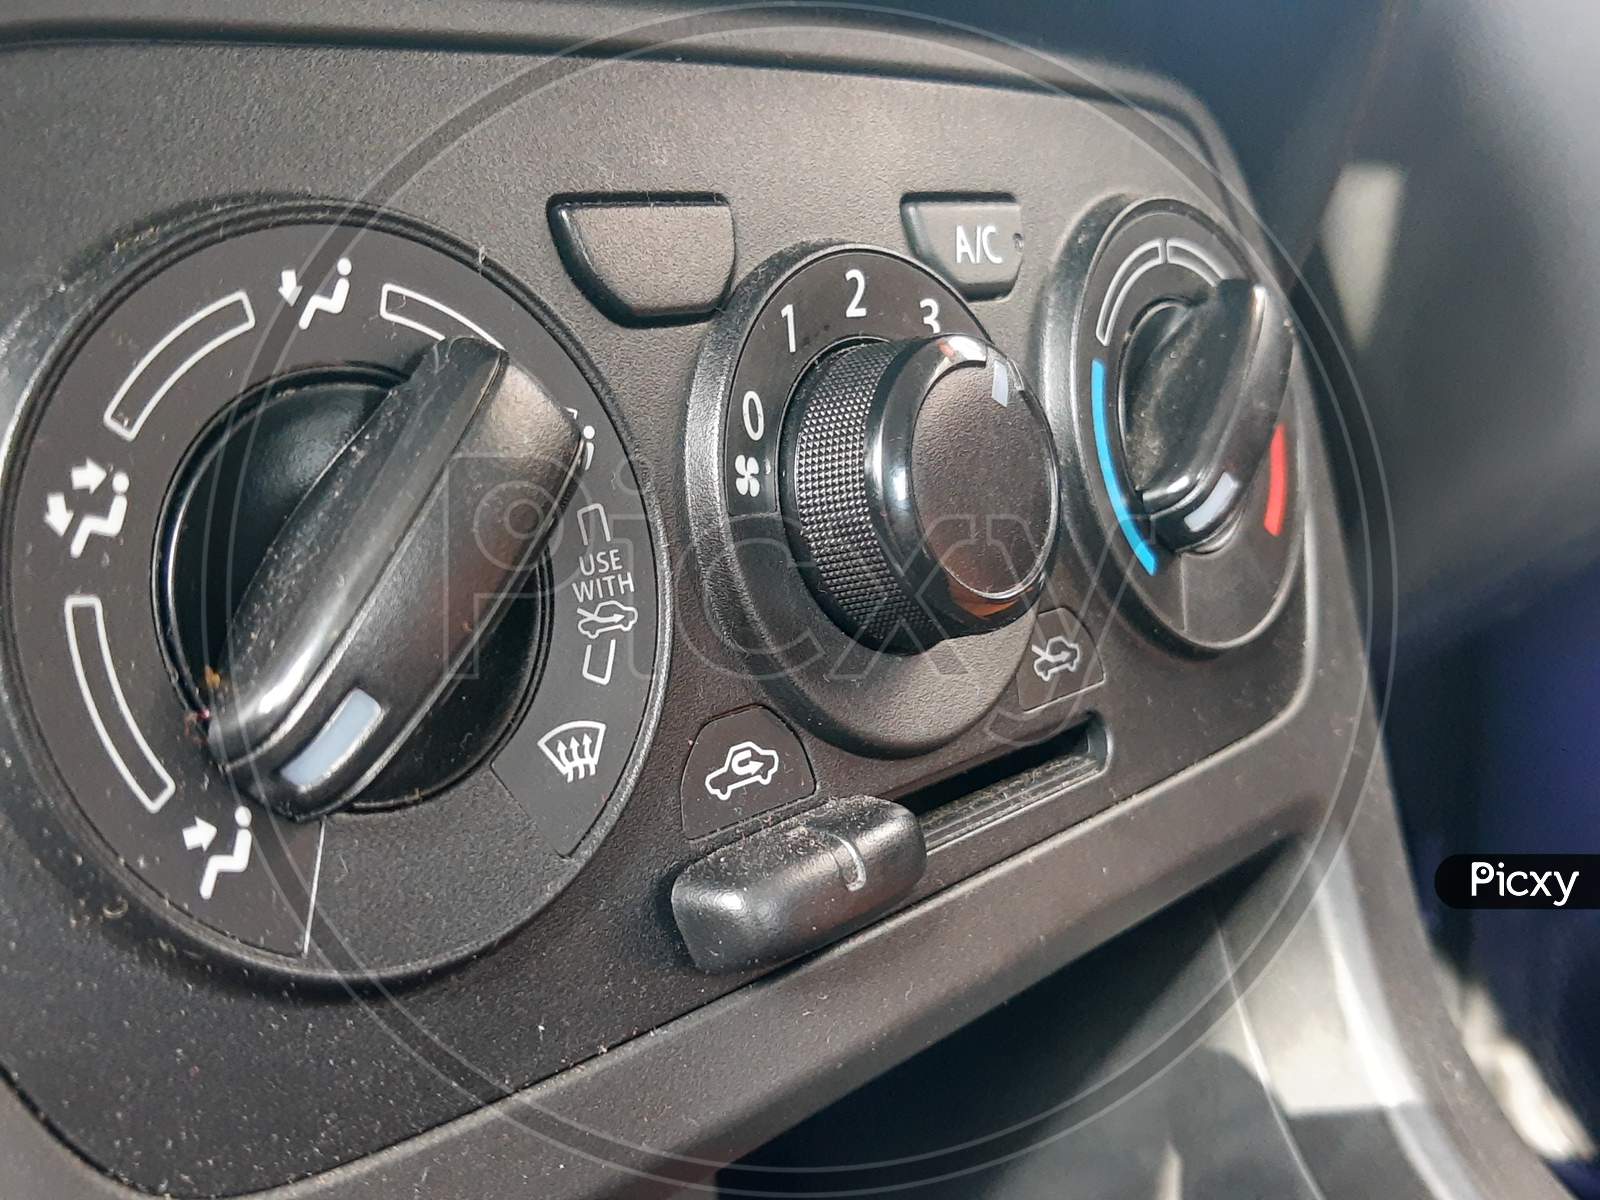 Details And Controls Of Modern Car - Close Up Instrument Automobile Panel With Climat Control View With Air Conditioning Buttons